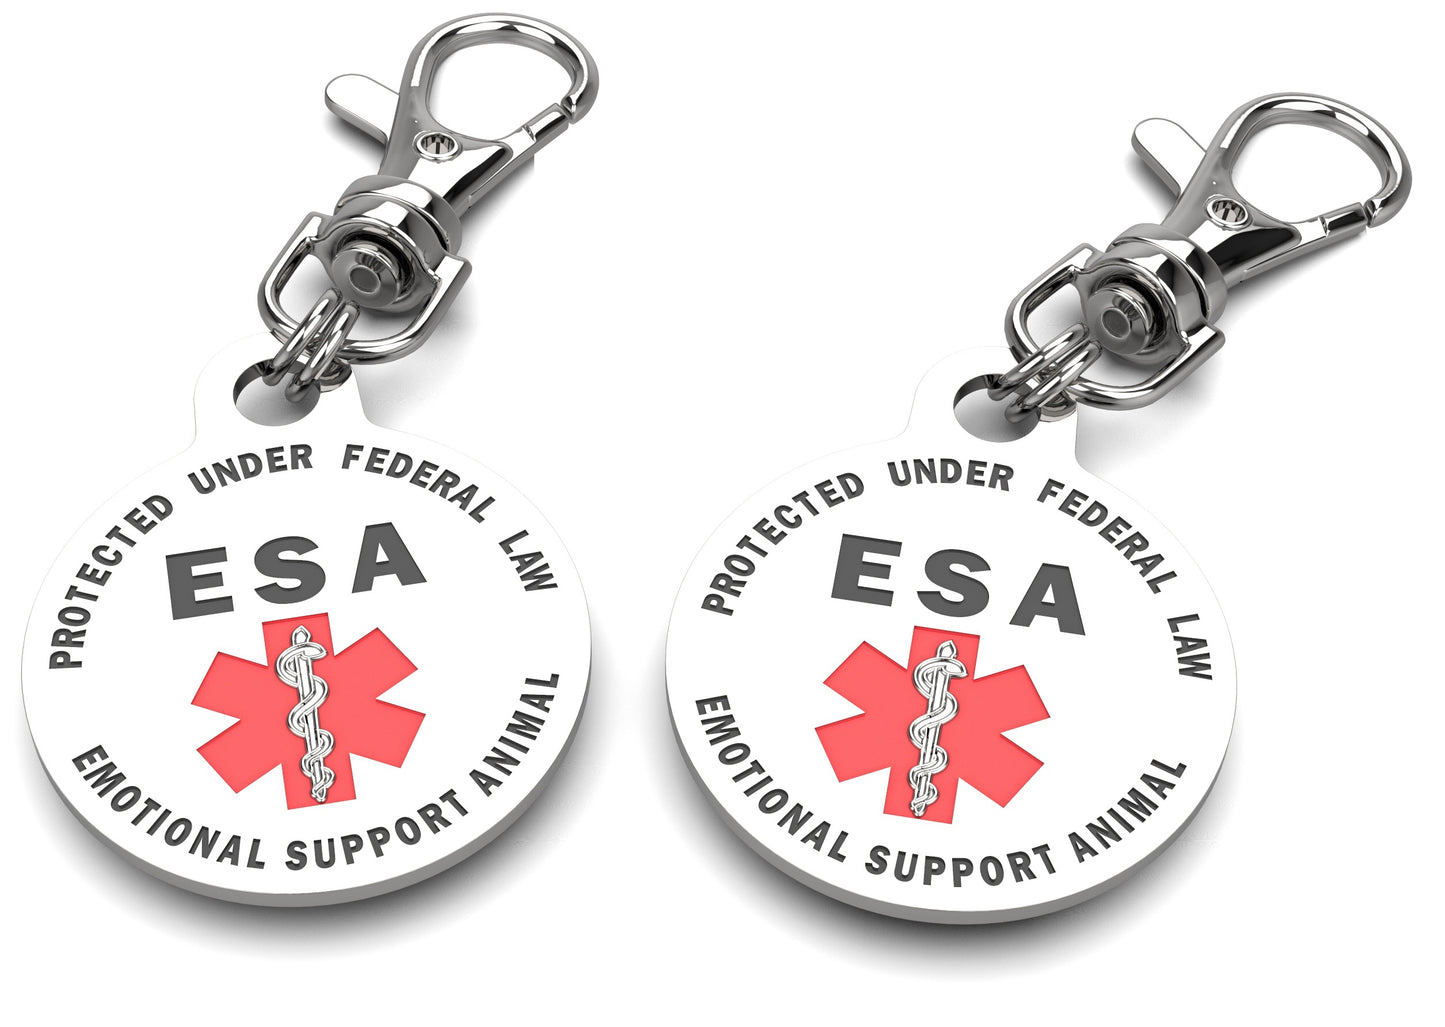 Emotional Support Animal (ESA) Tag 1.25" inch Double Sided with Red Medical Alert Symbol - K9King